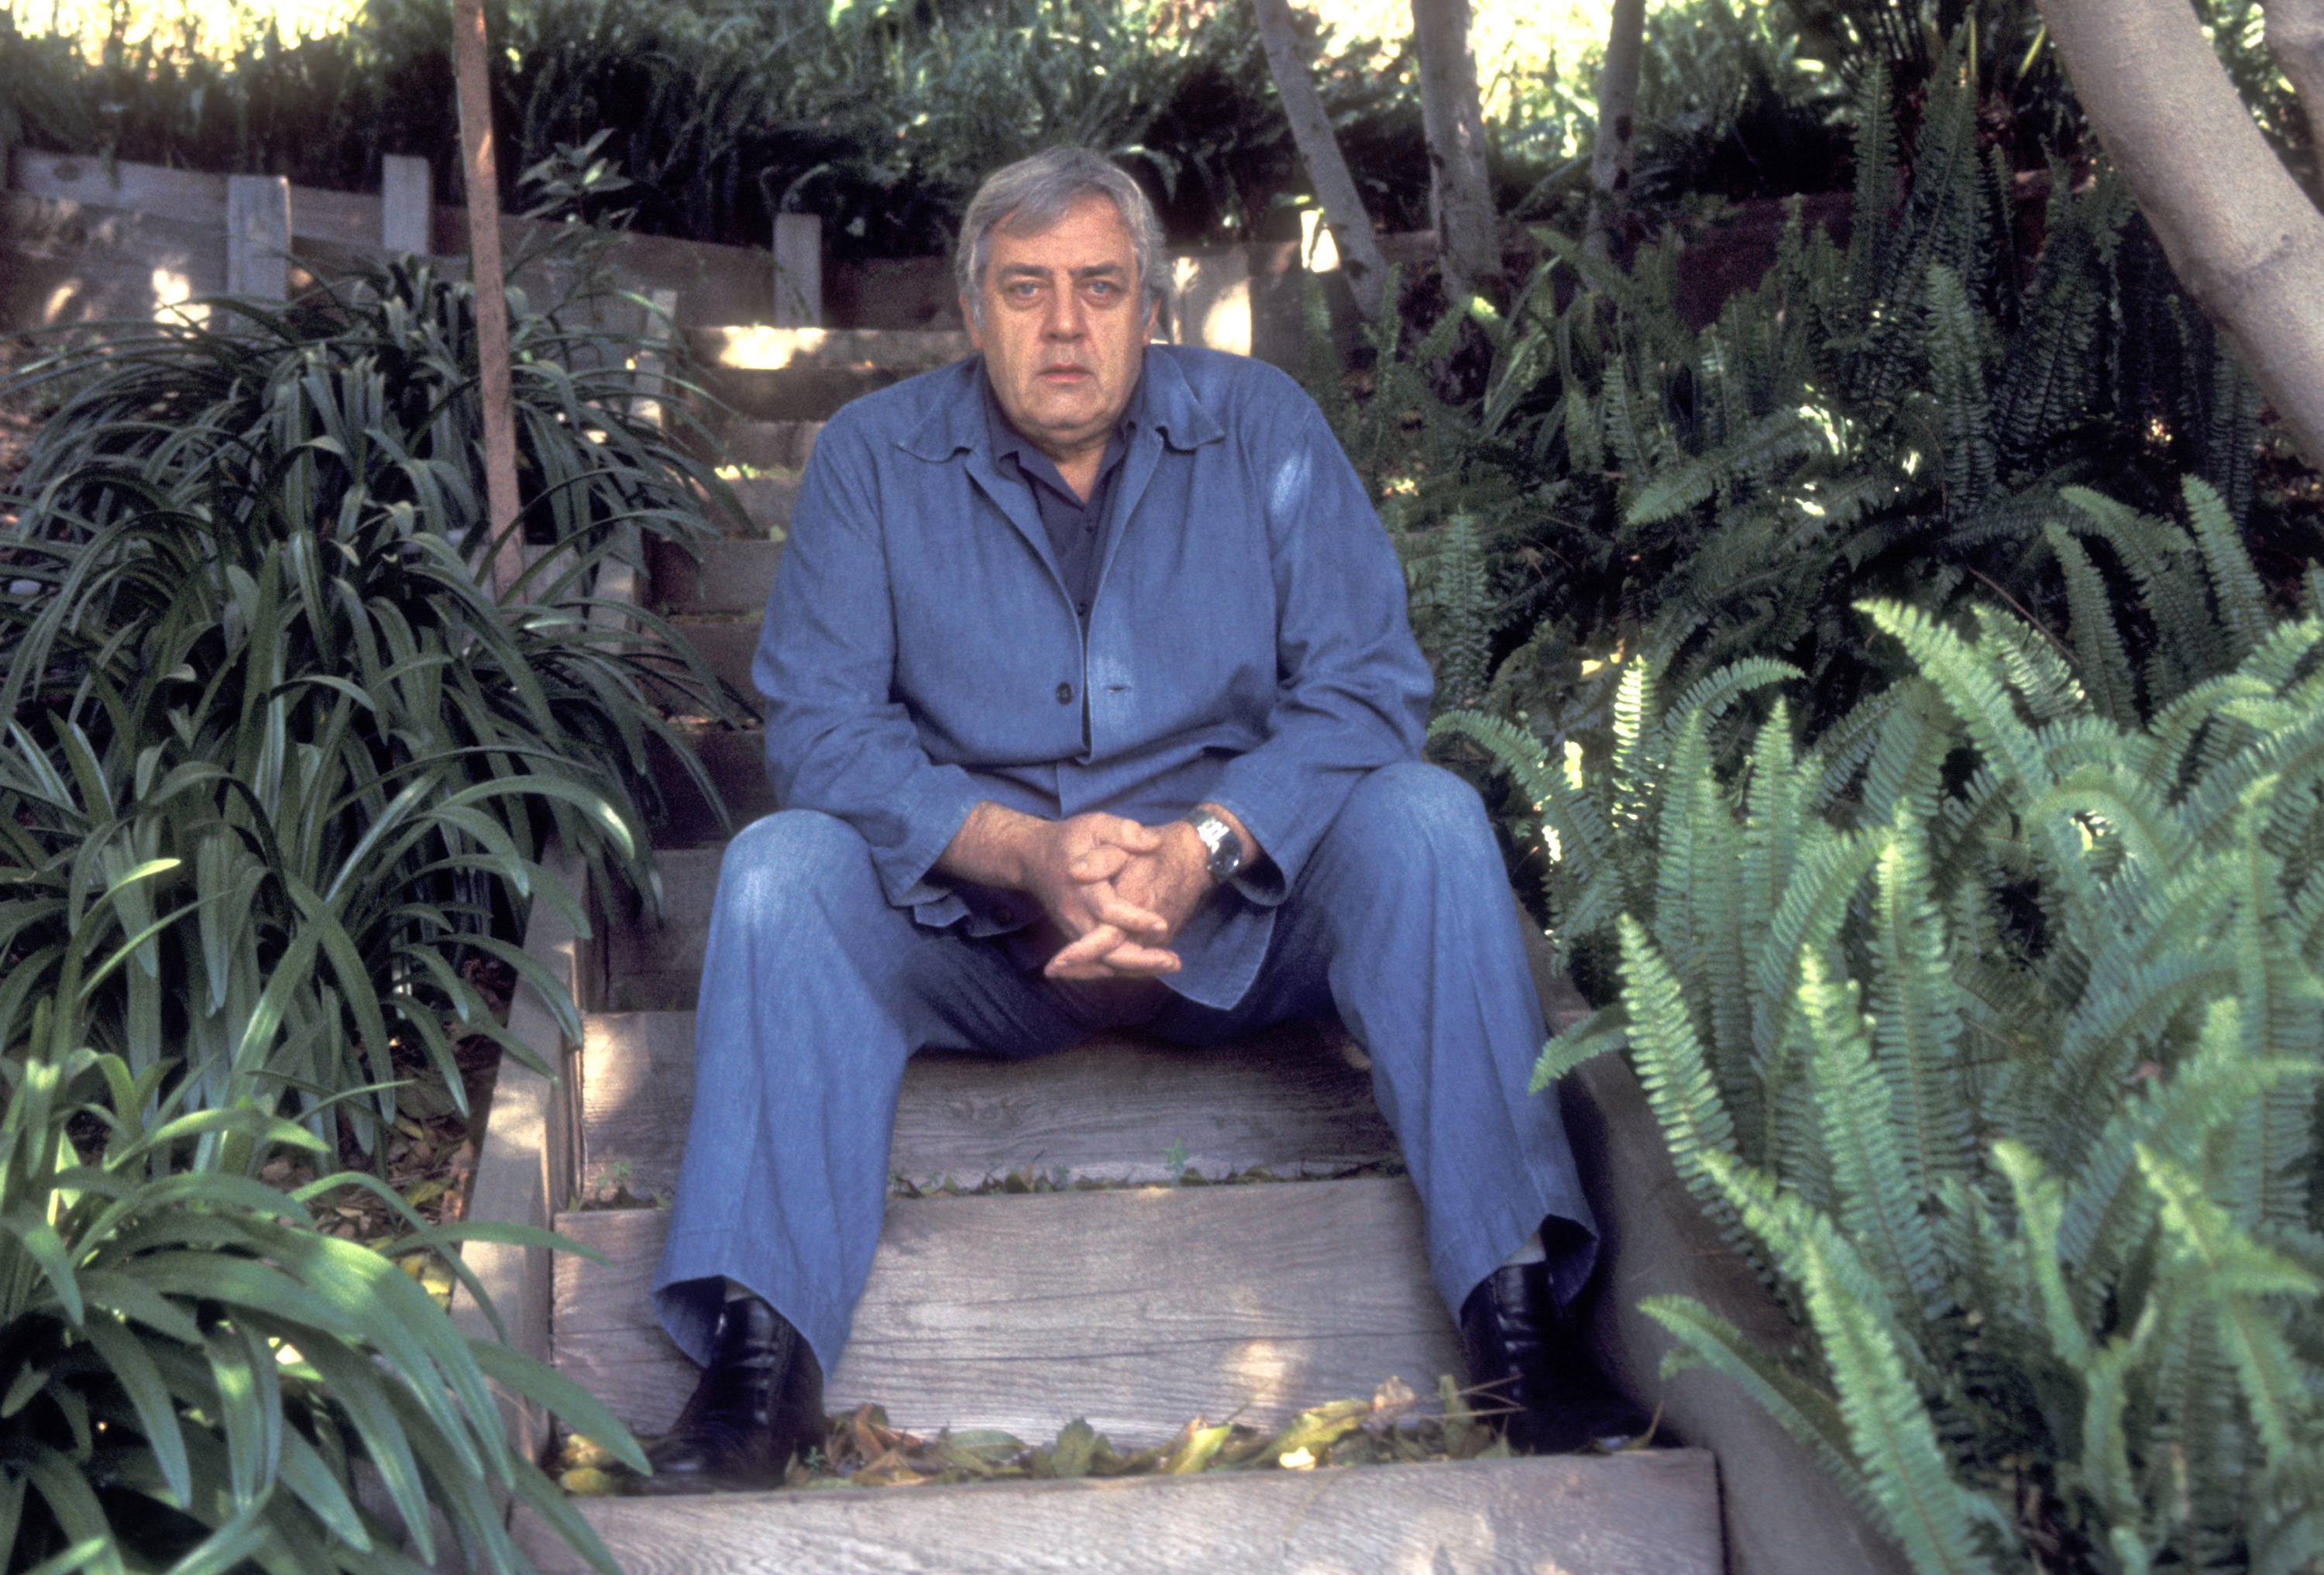 Raymond Burr on March 11, 1977, in Hollywood, California | Source: Getty Images